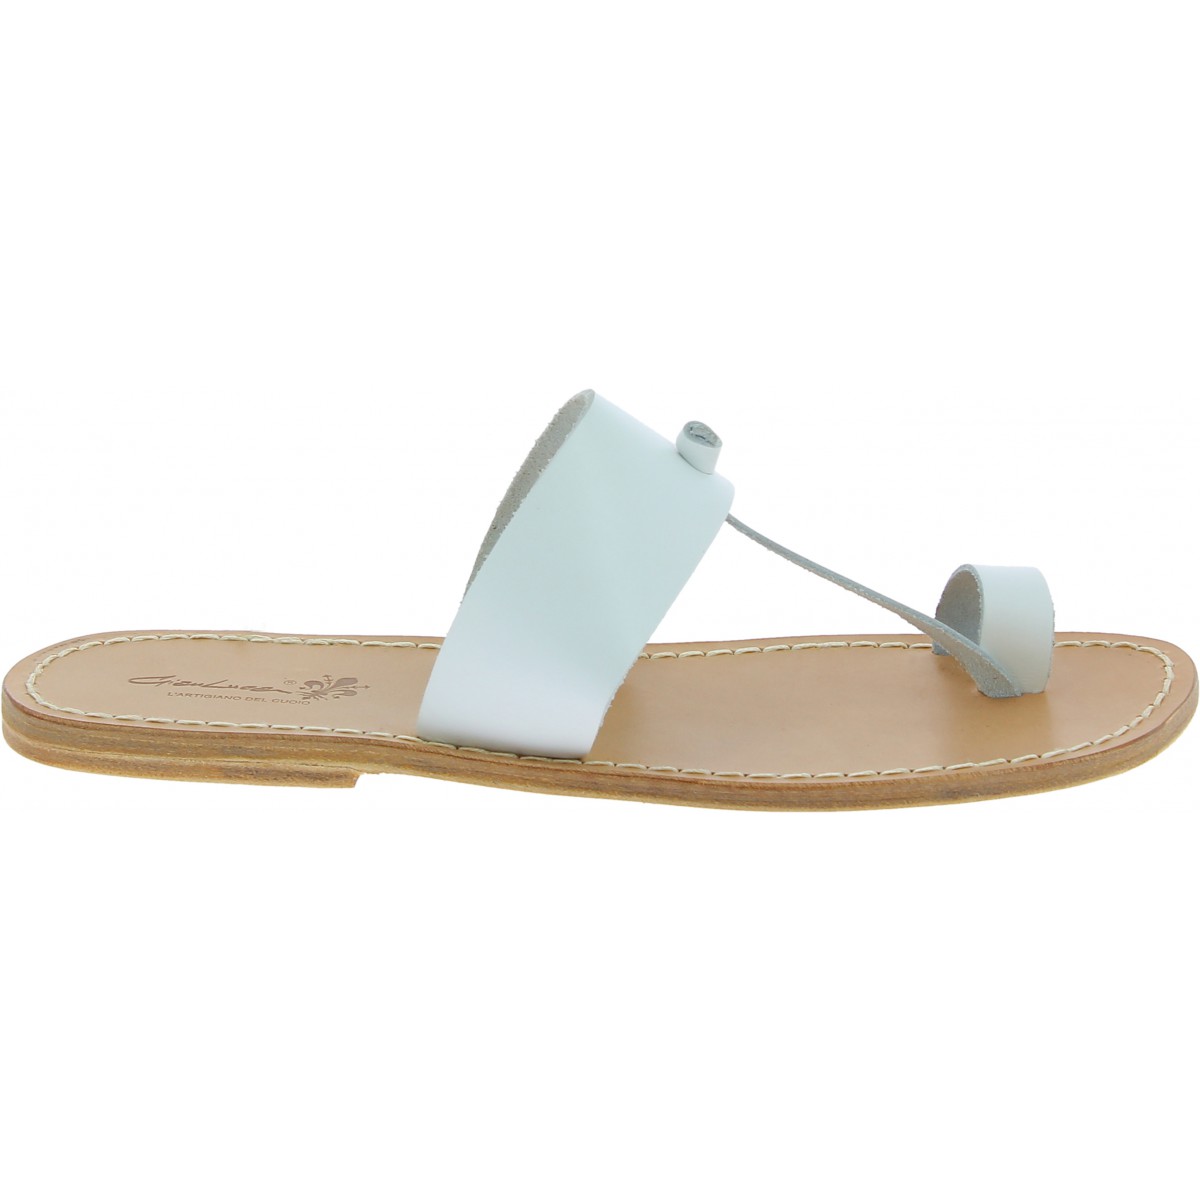 White leather thong sandals for men Handmade in Italy | The leather ...